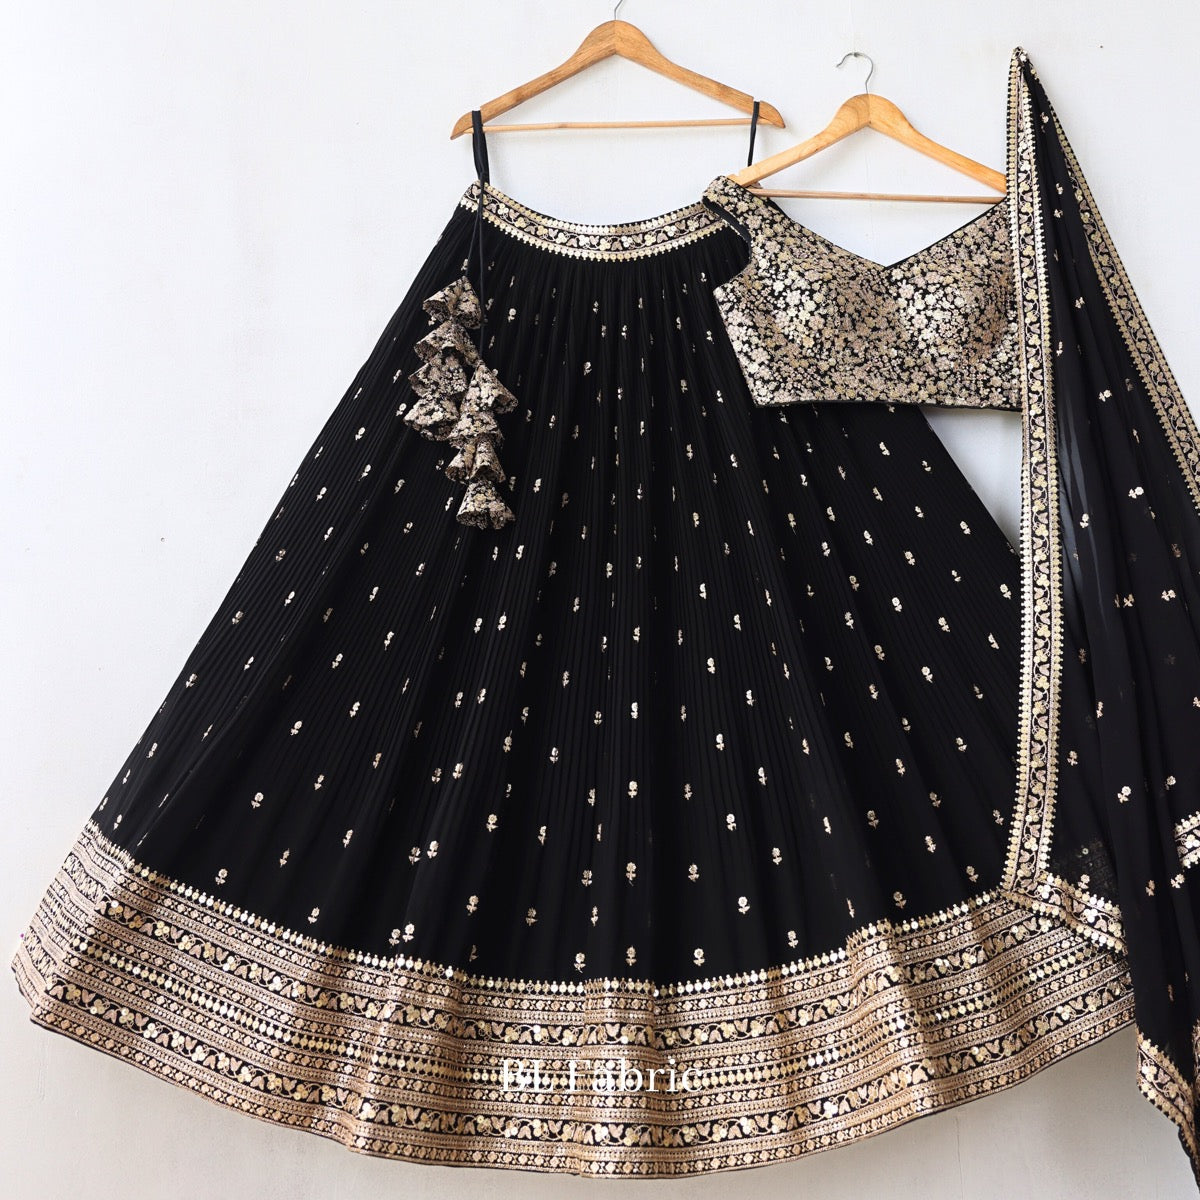 Flauntindesi - Black Lehenga from Amazon❤️ Watch my review... | Facebook